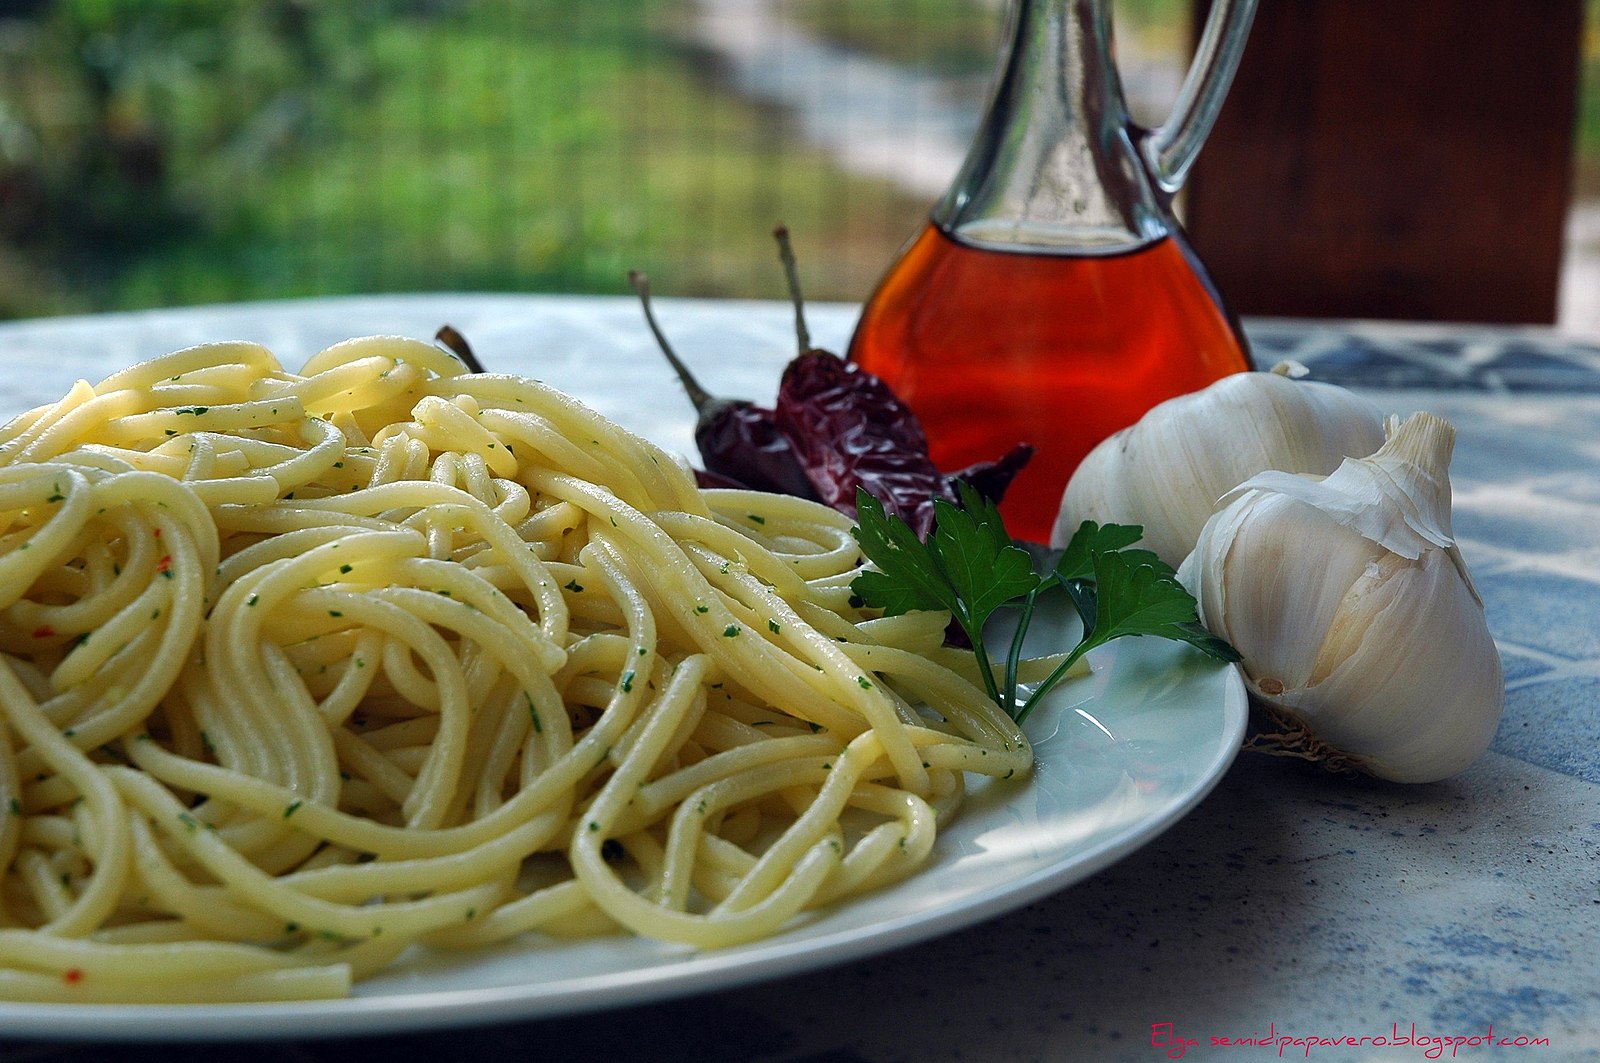 A photo of a plate of spaghetti with small green herbs scattered atop it. On the right side of the plate are a parsley spring and dried peppers. Next to the plate are two garlic bulbs and a decanter of vinegar.